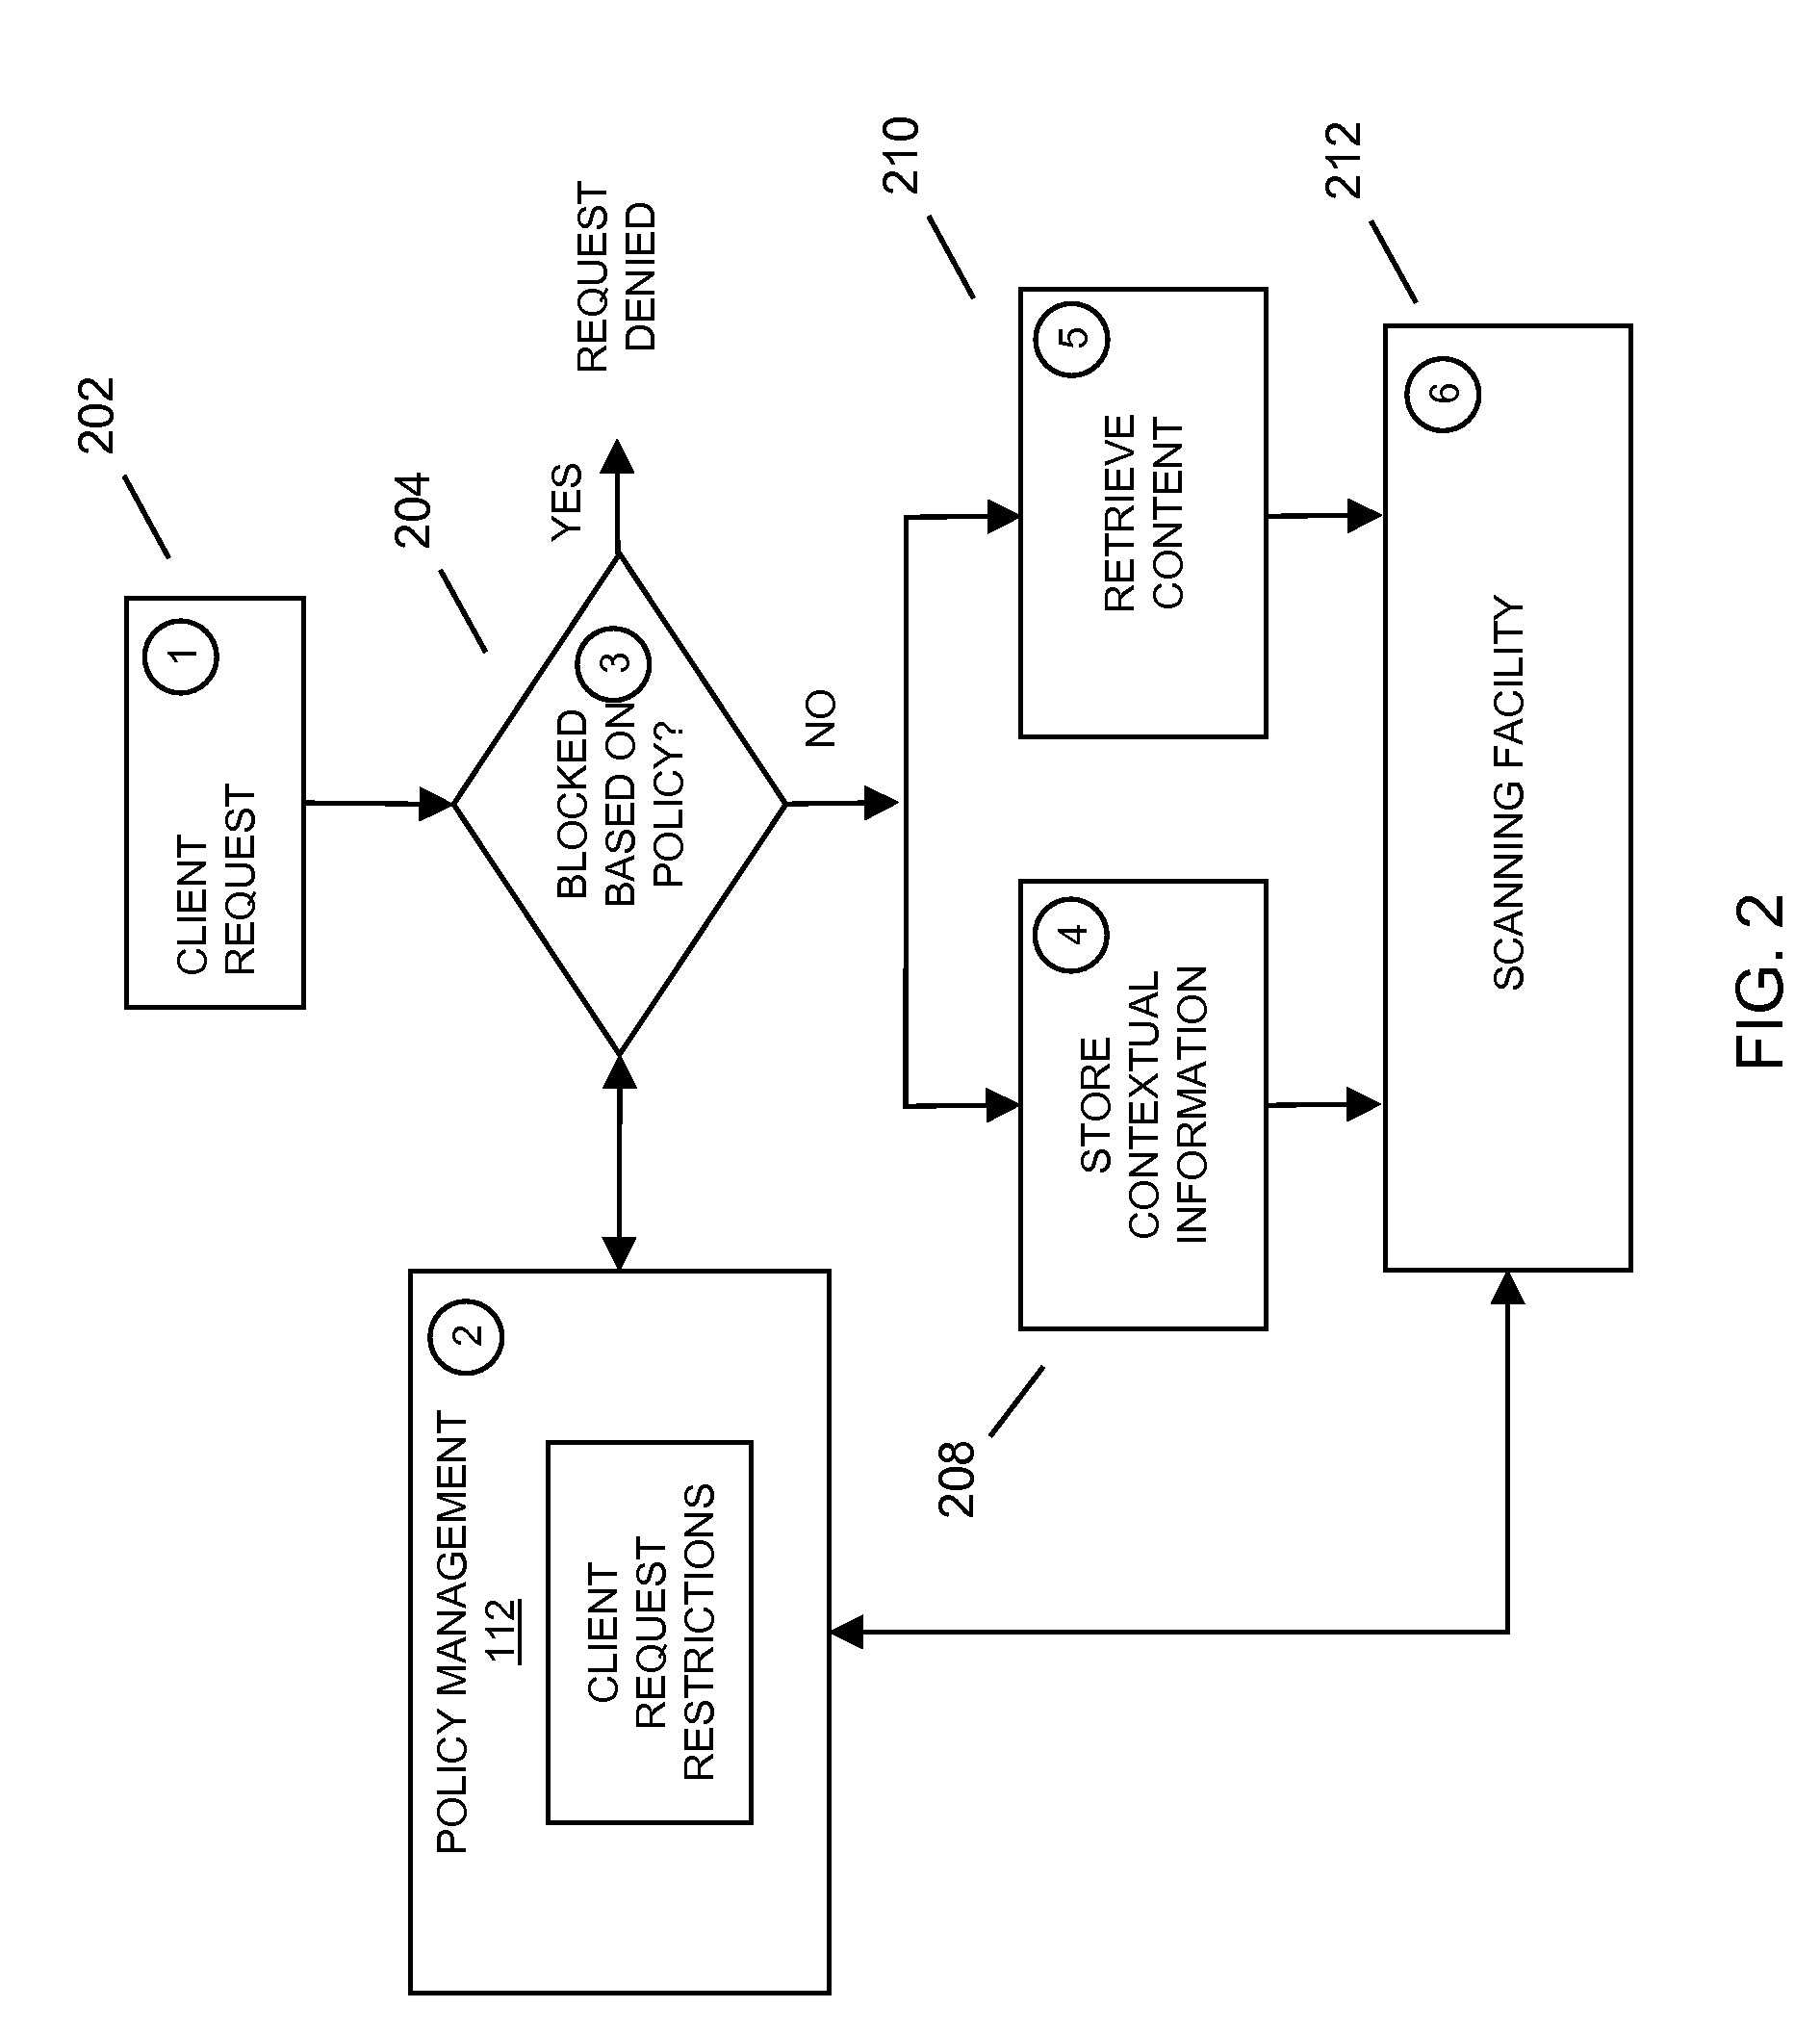 Method and system for detecting restricted content associated with retrieved content